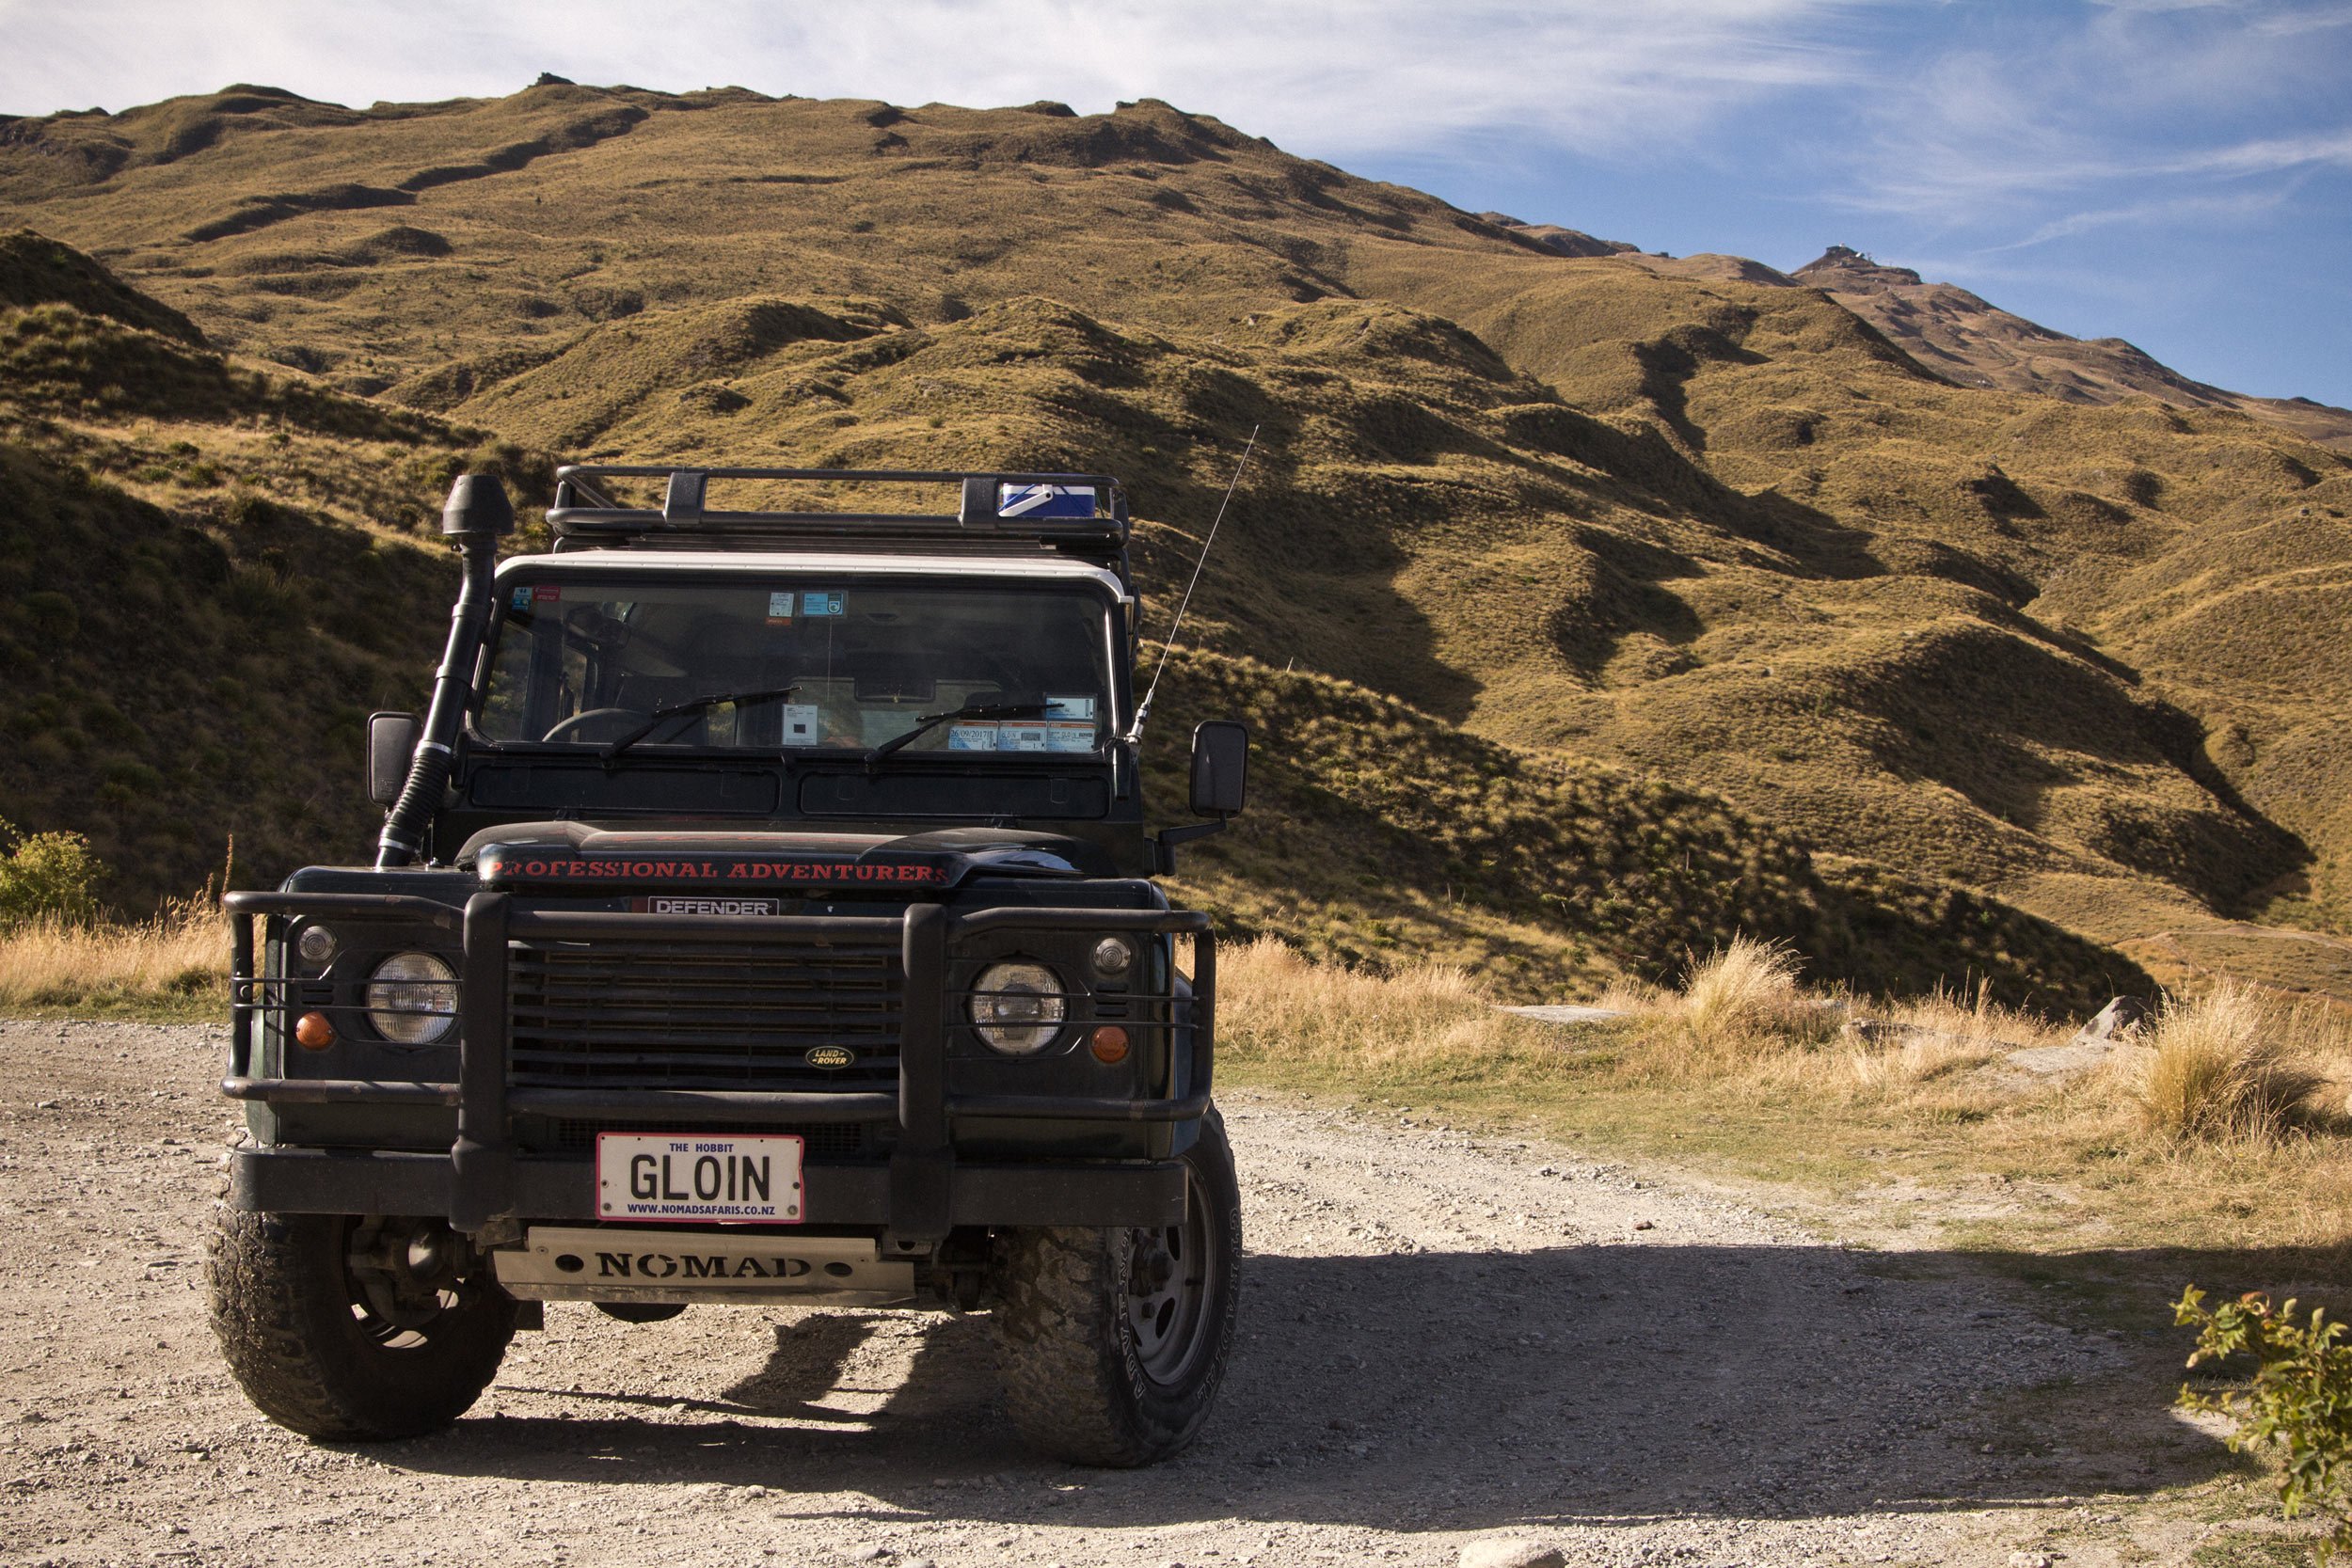 nomad-safaris-jeep-in-mountains-near-queenstown-new-zealand-south-island